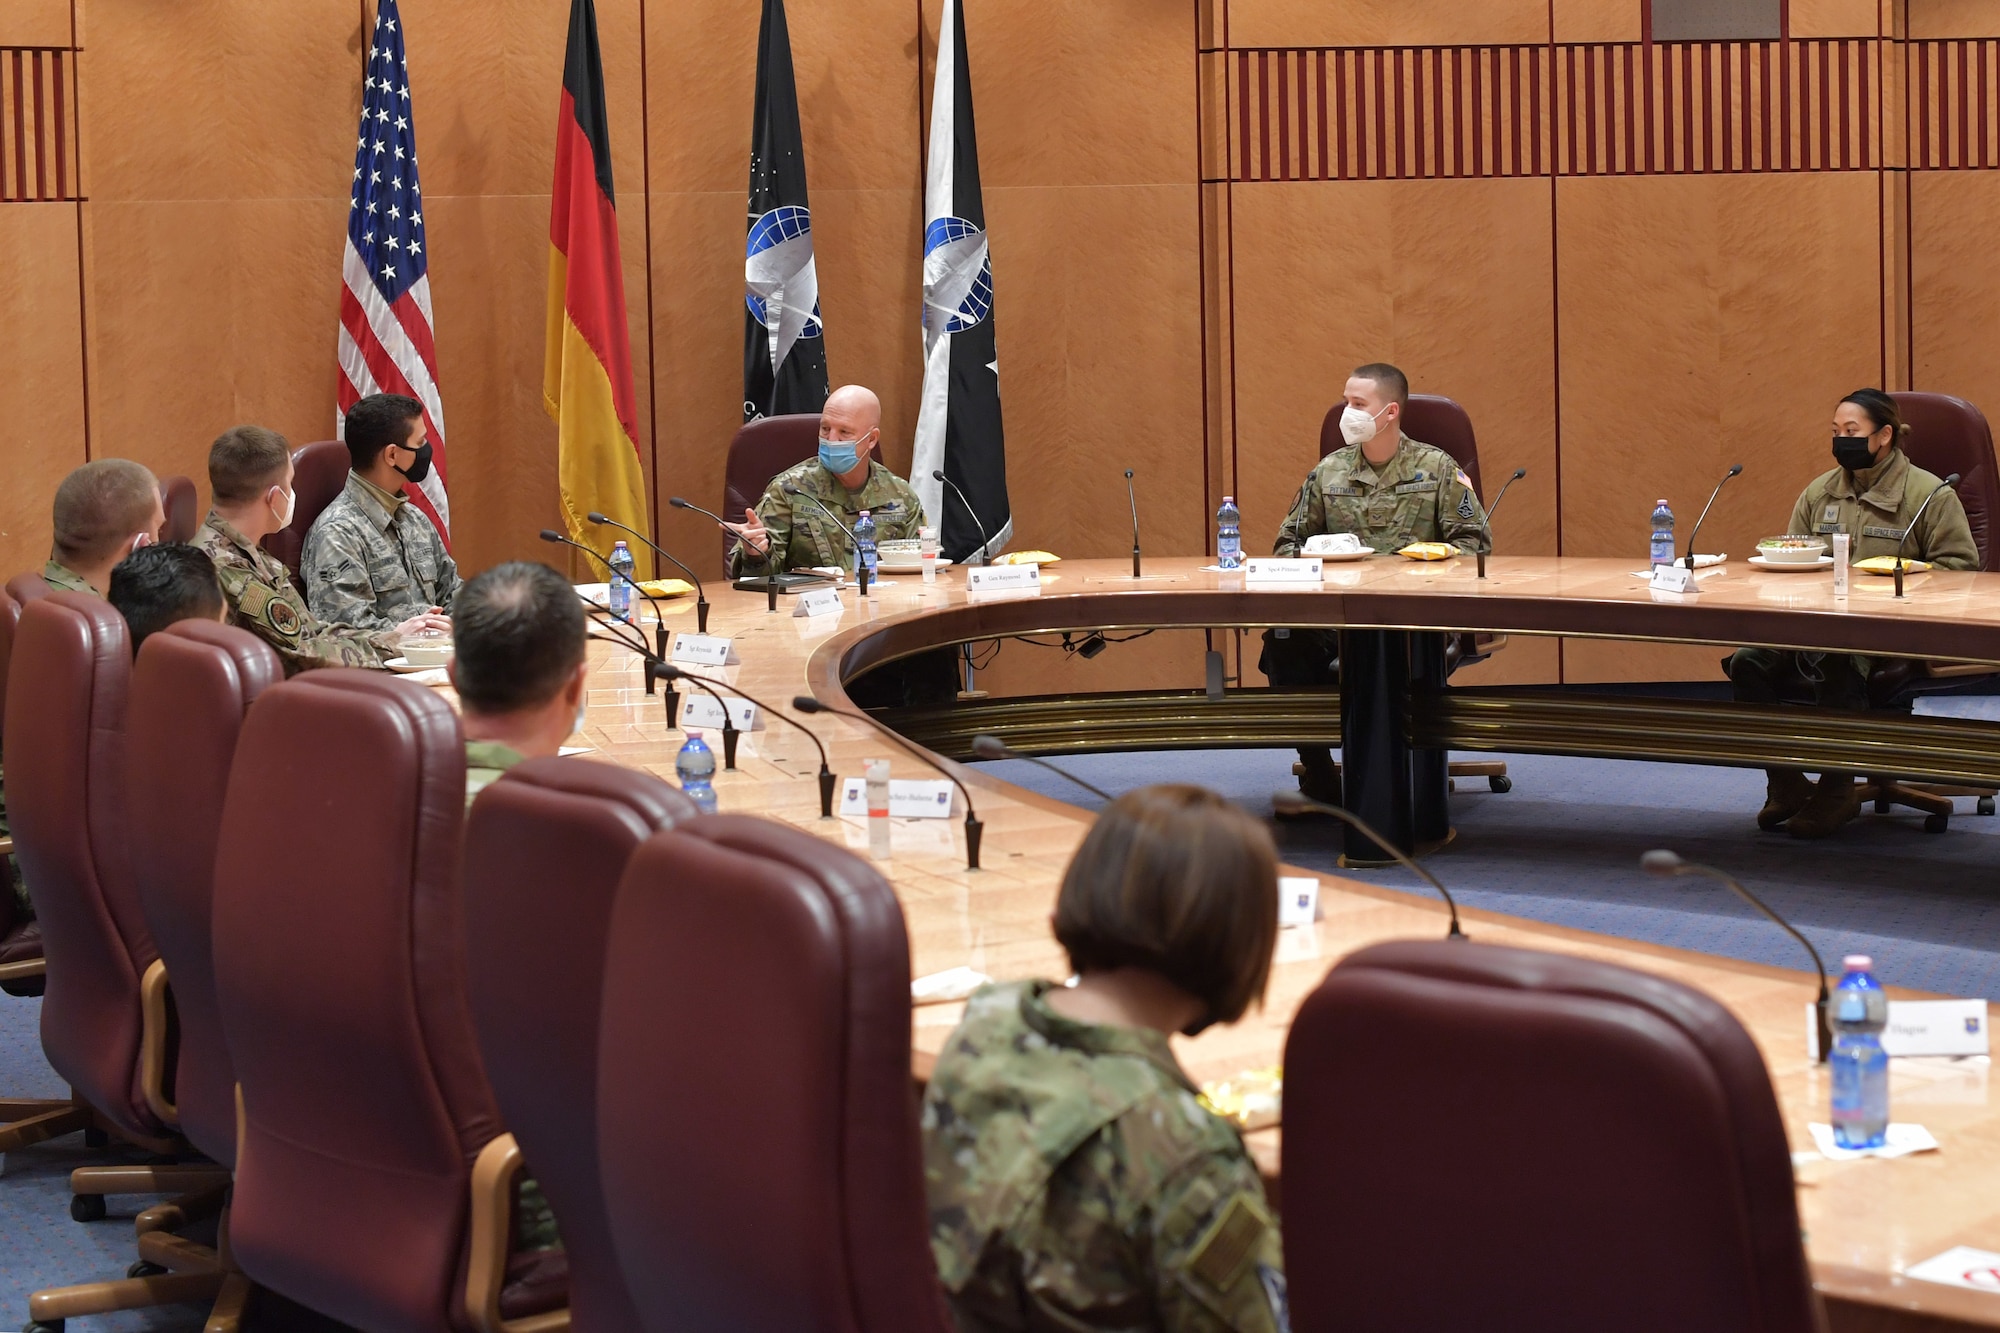 Guardians and Airmen sitting around a conference table.